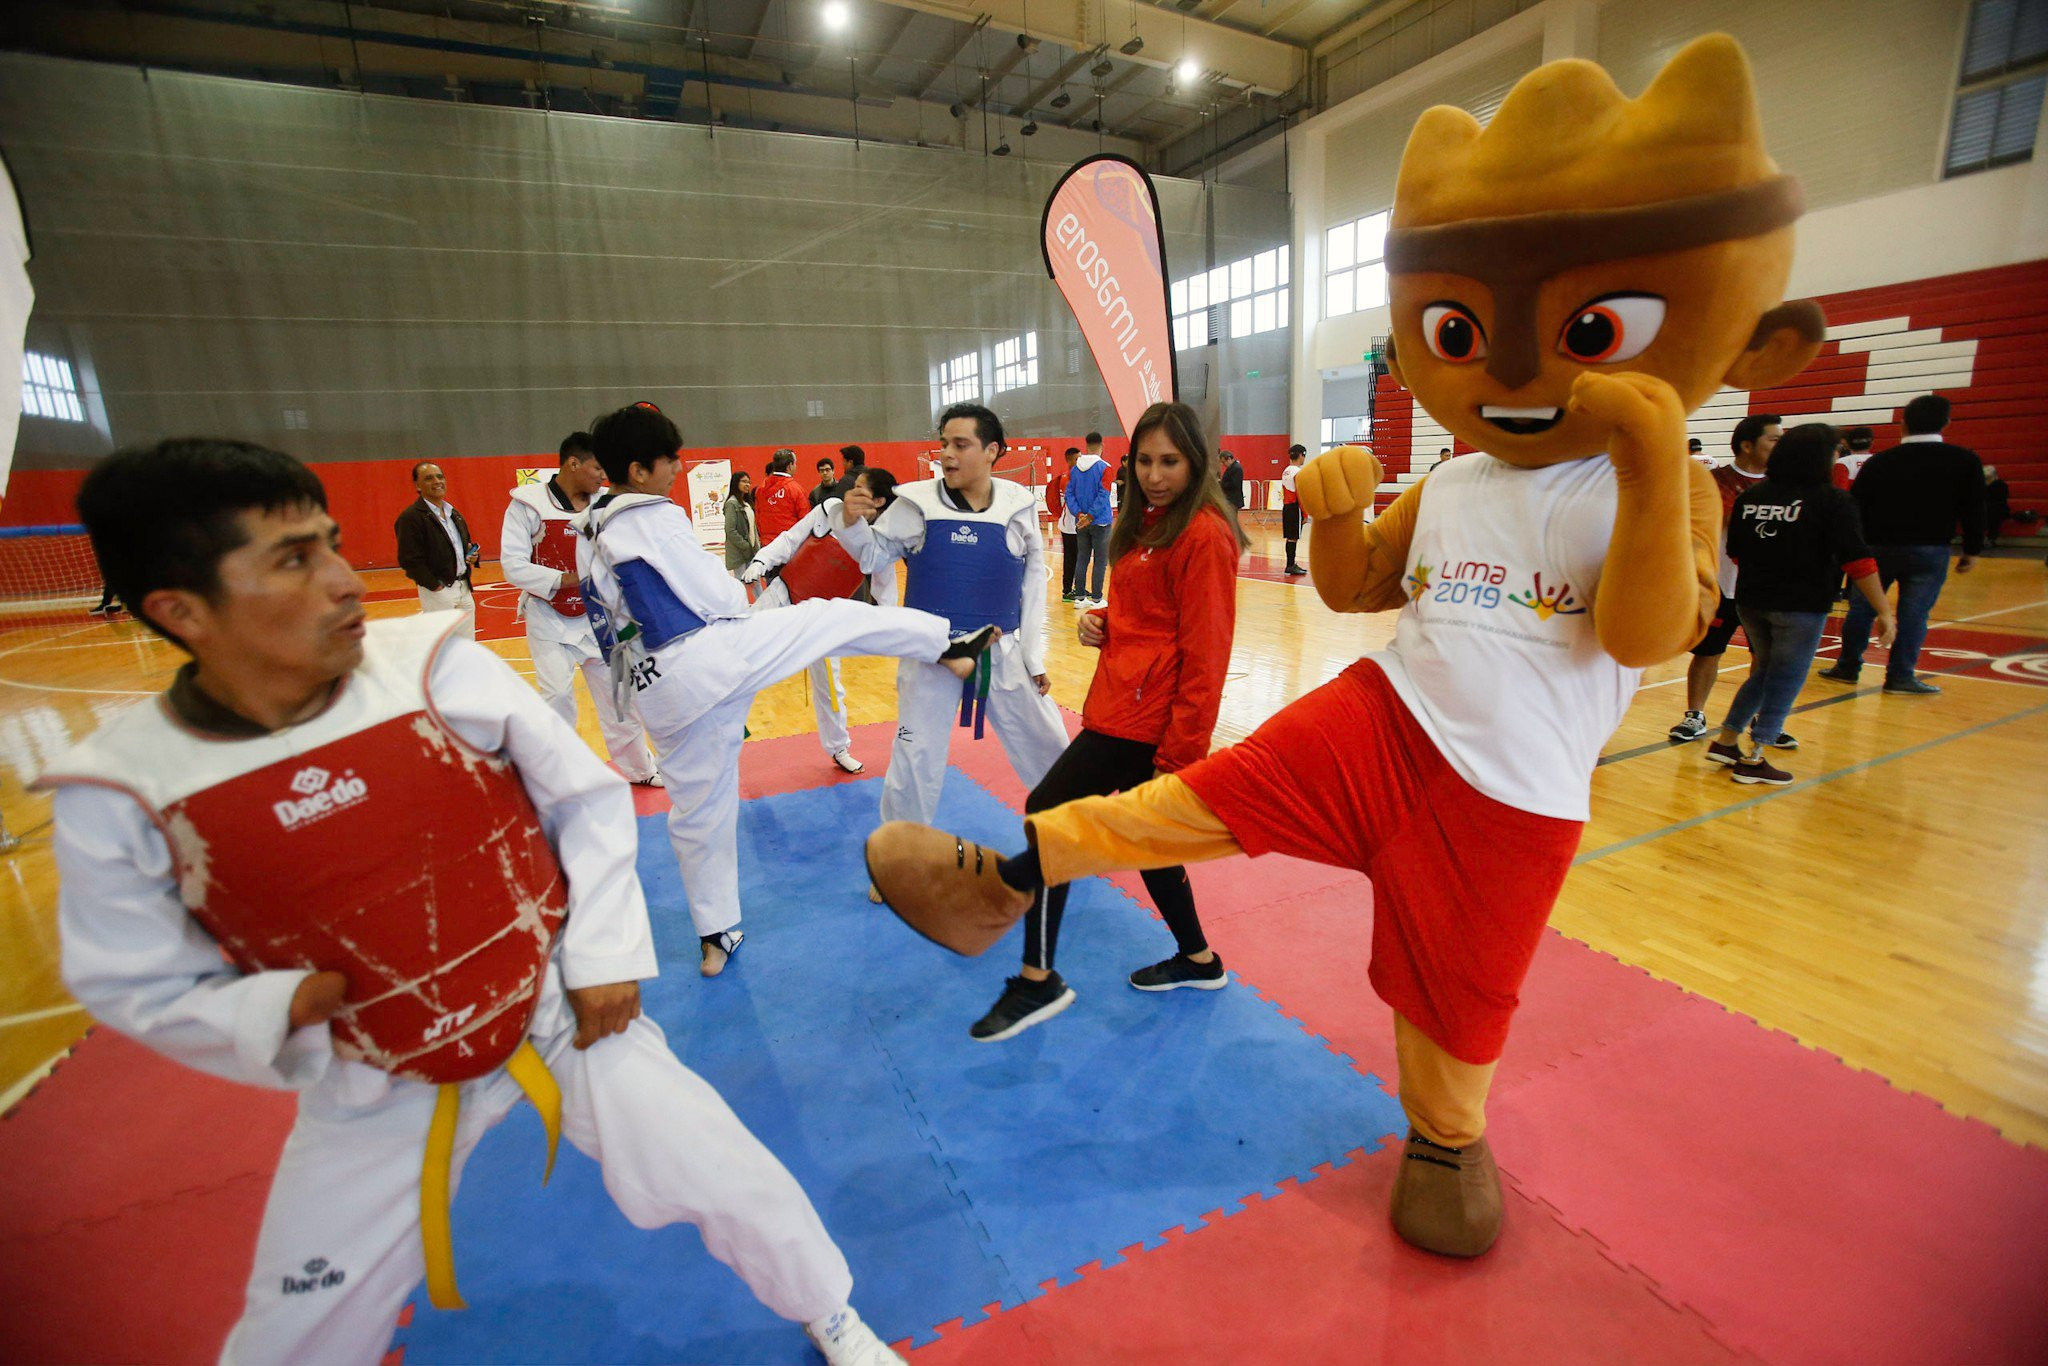 Lima 2019 marked one year to go until the Parapan American Games with an exhibition of sport in the Peruvian capital ©Lima 2019